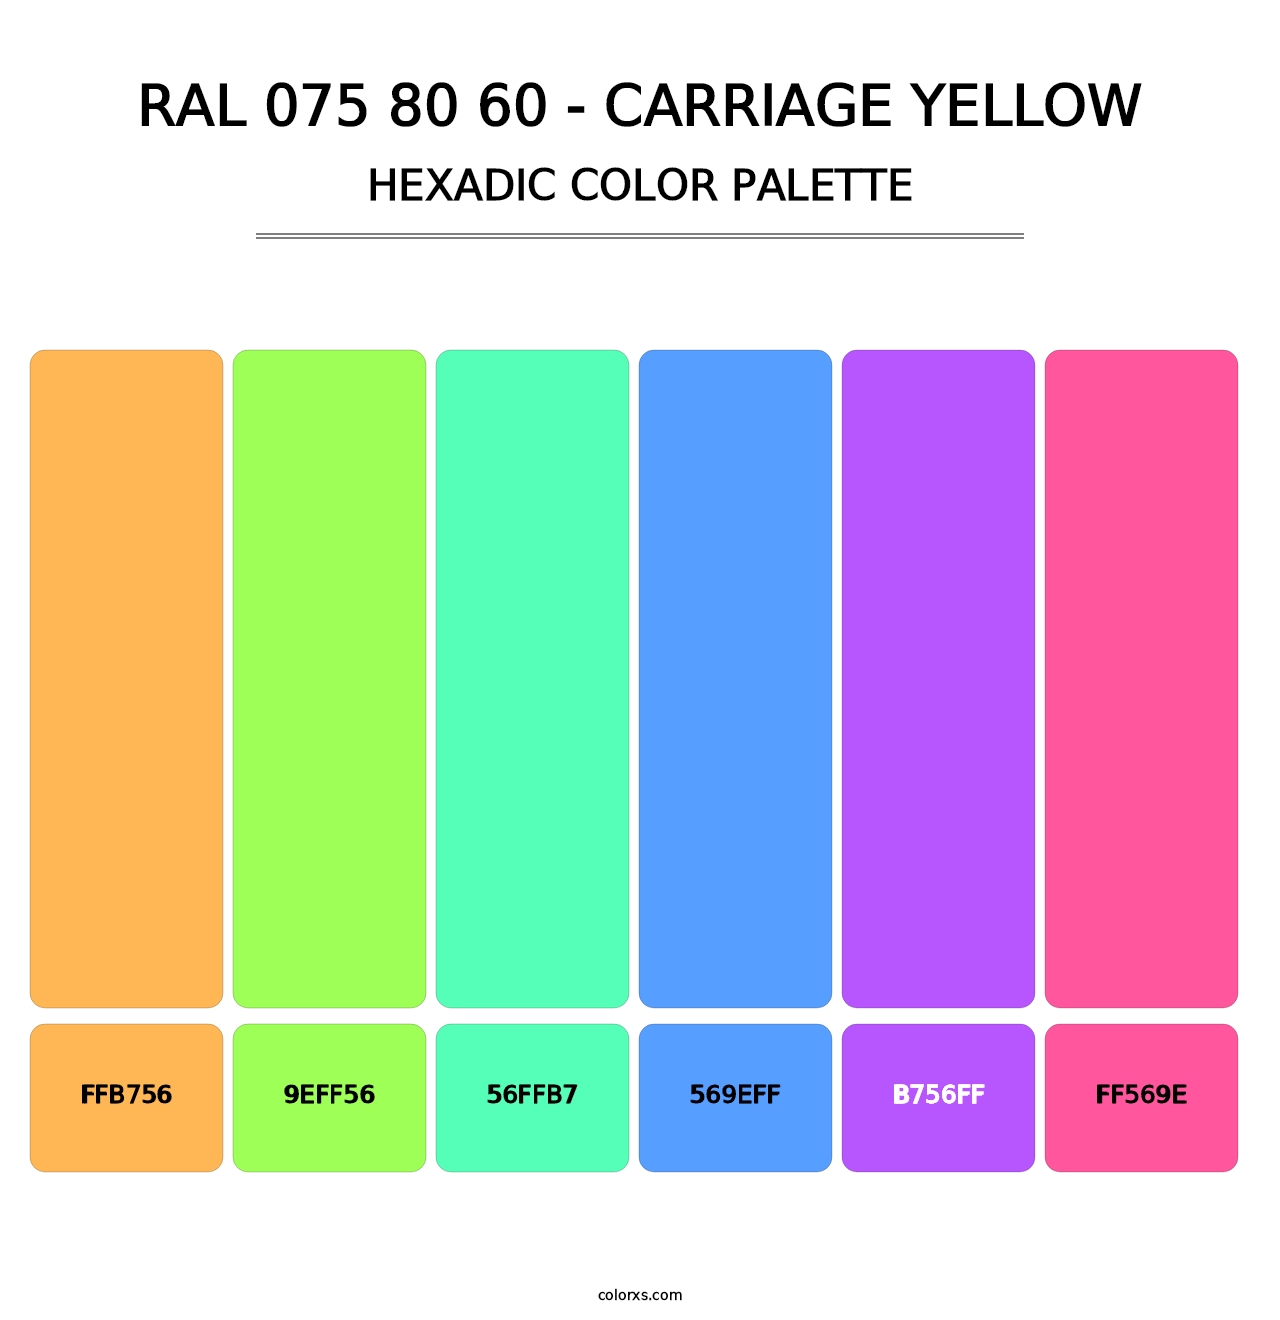 RAL 075 80 60 - Carriage Yellow - Hexadic Color Palette